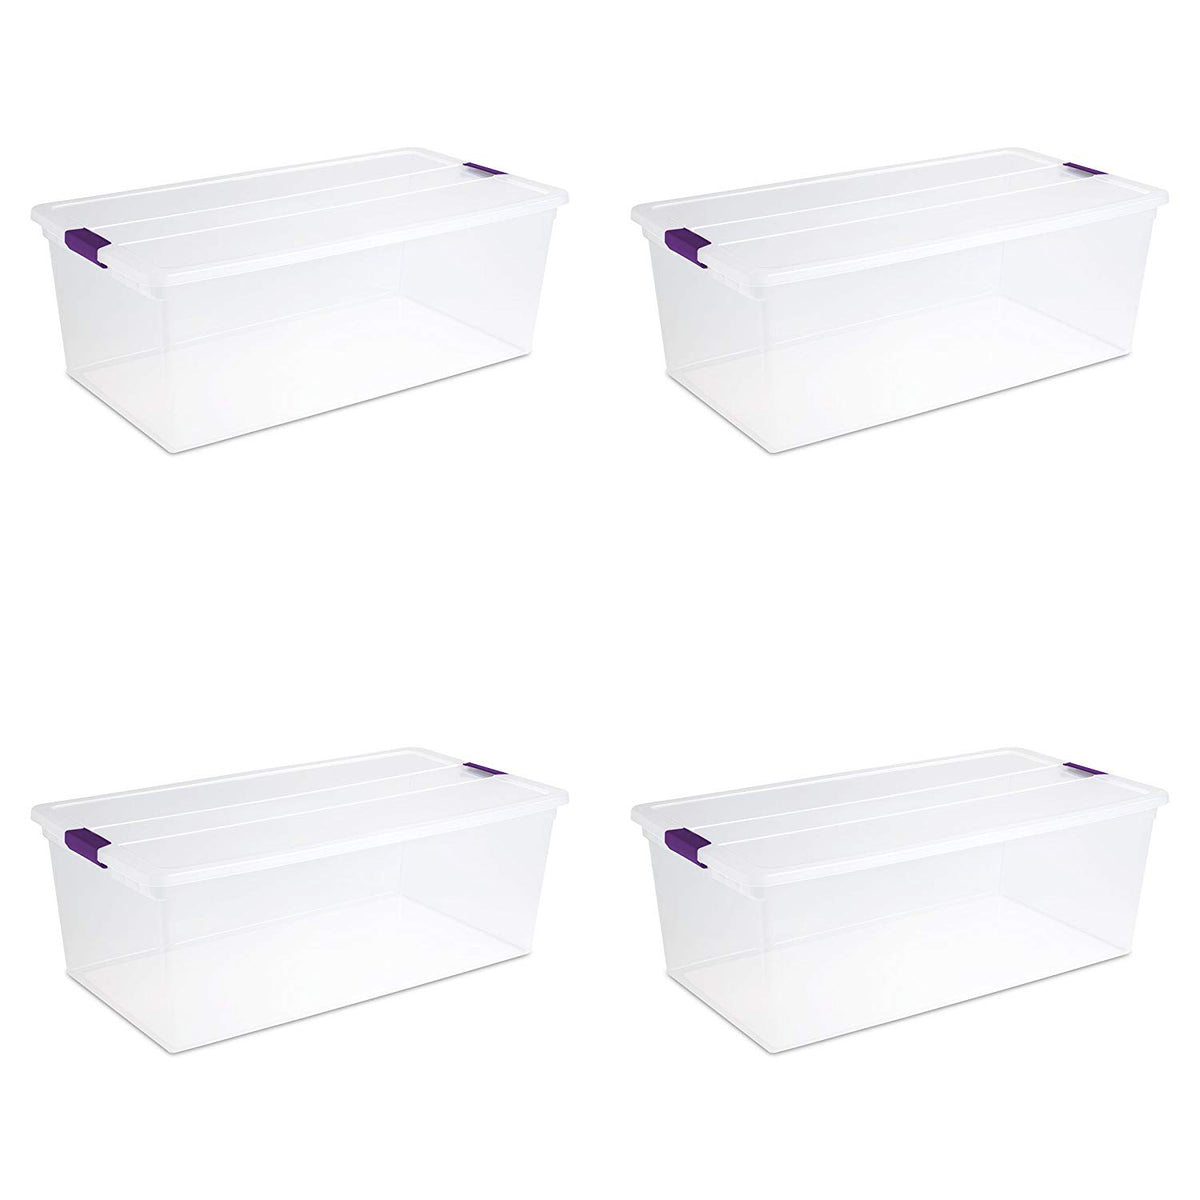 Sterilite 17641704 ClearView Latch Box with Sweet Plum Latches, 110 Qt